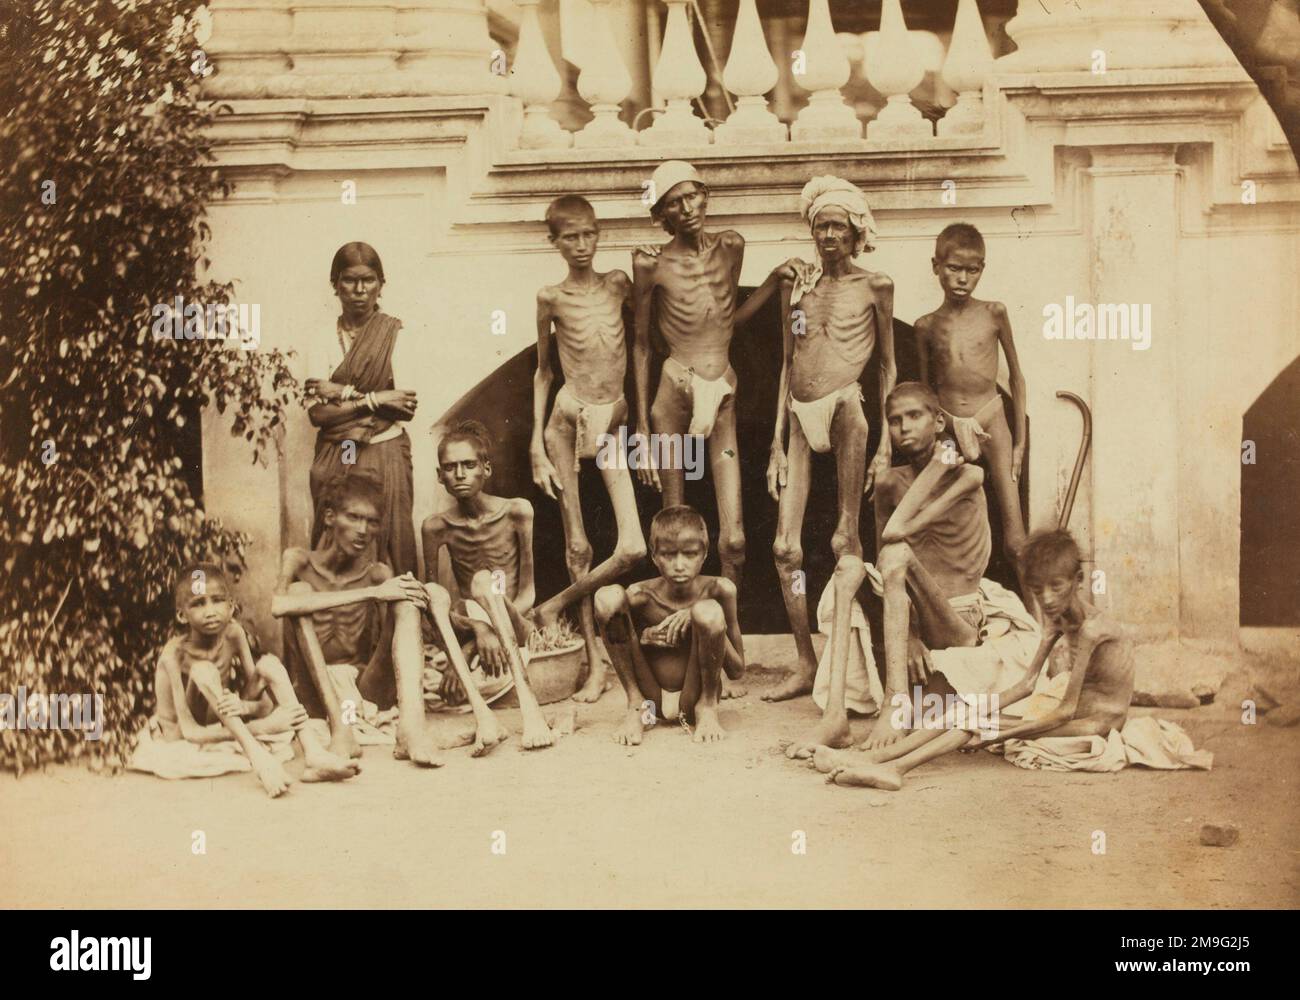 Willoughby Wallace Hooper - Famine/Genocide - British Raj - Madras, India Stock Photo